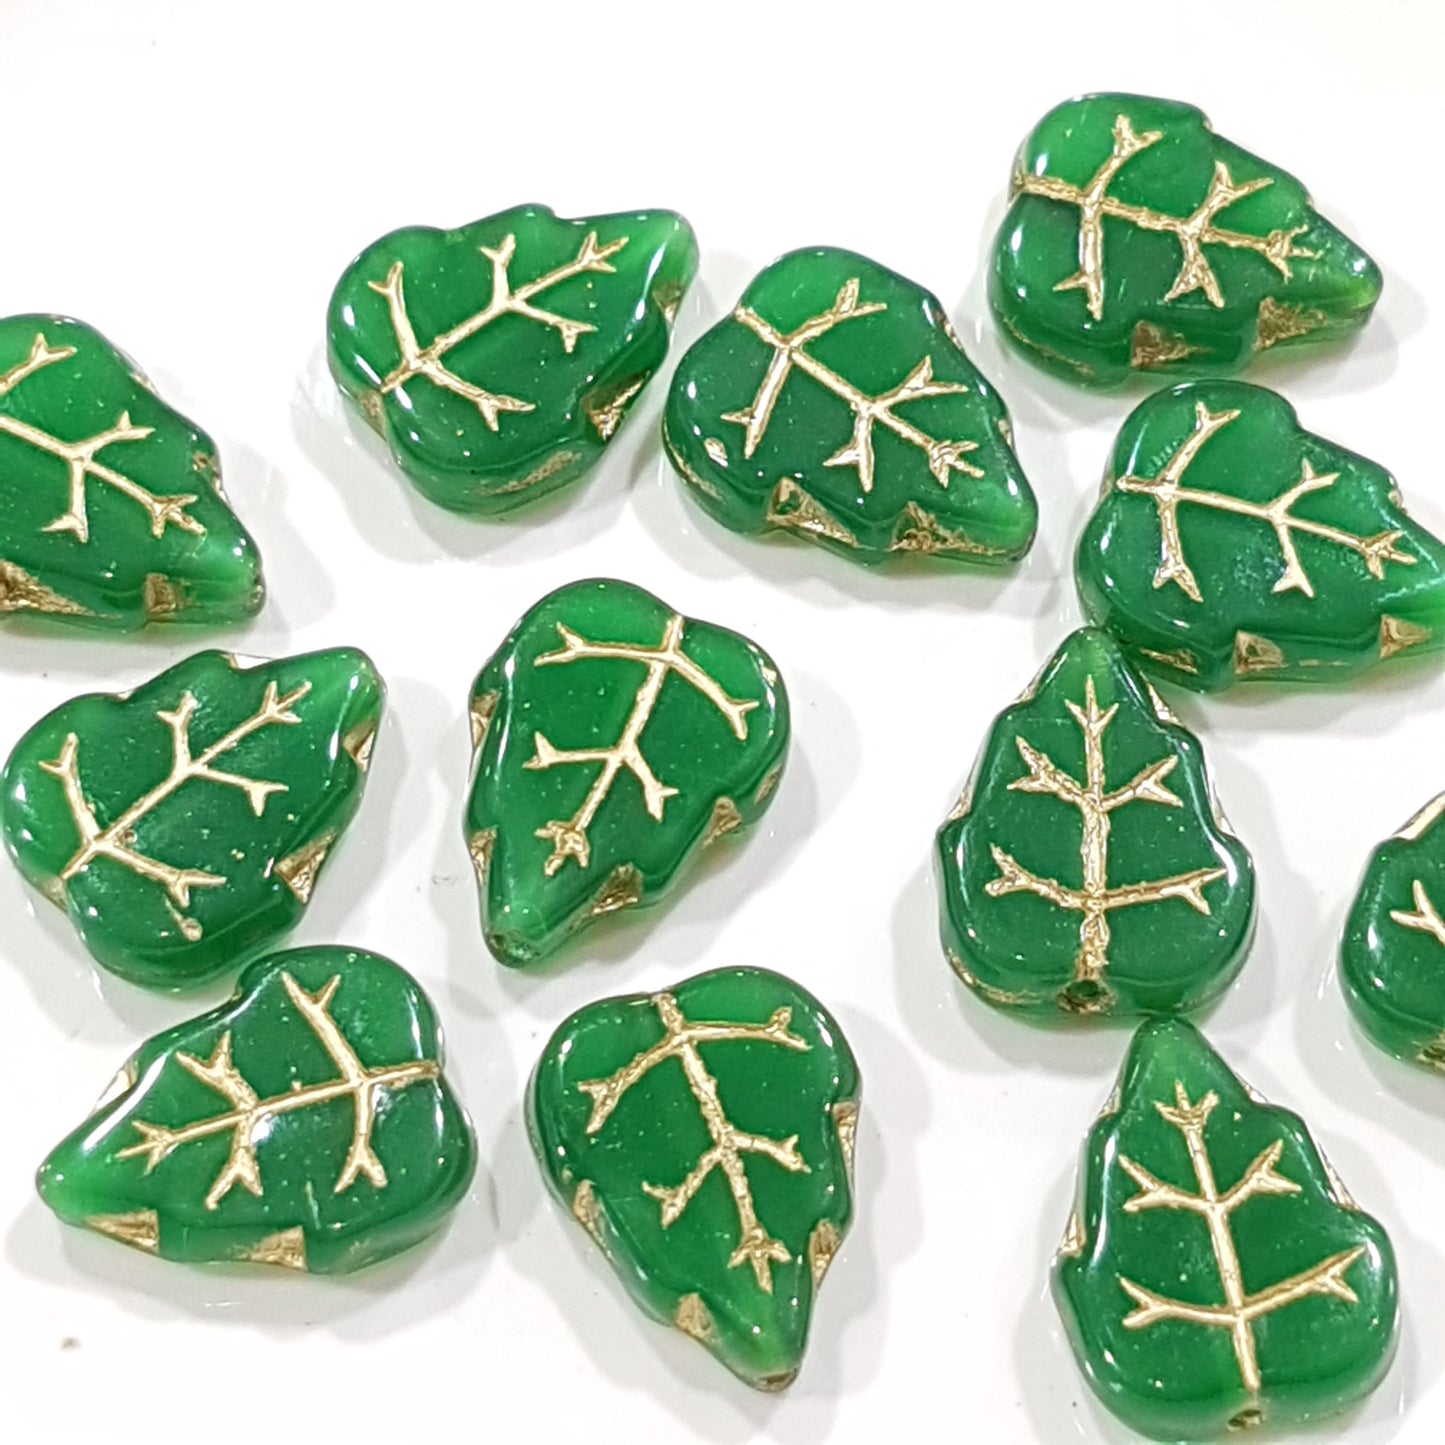 12pc Czech Opaque Green Inlaid Leaves